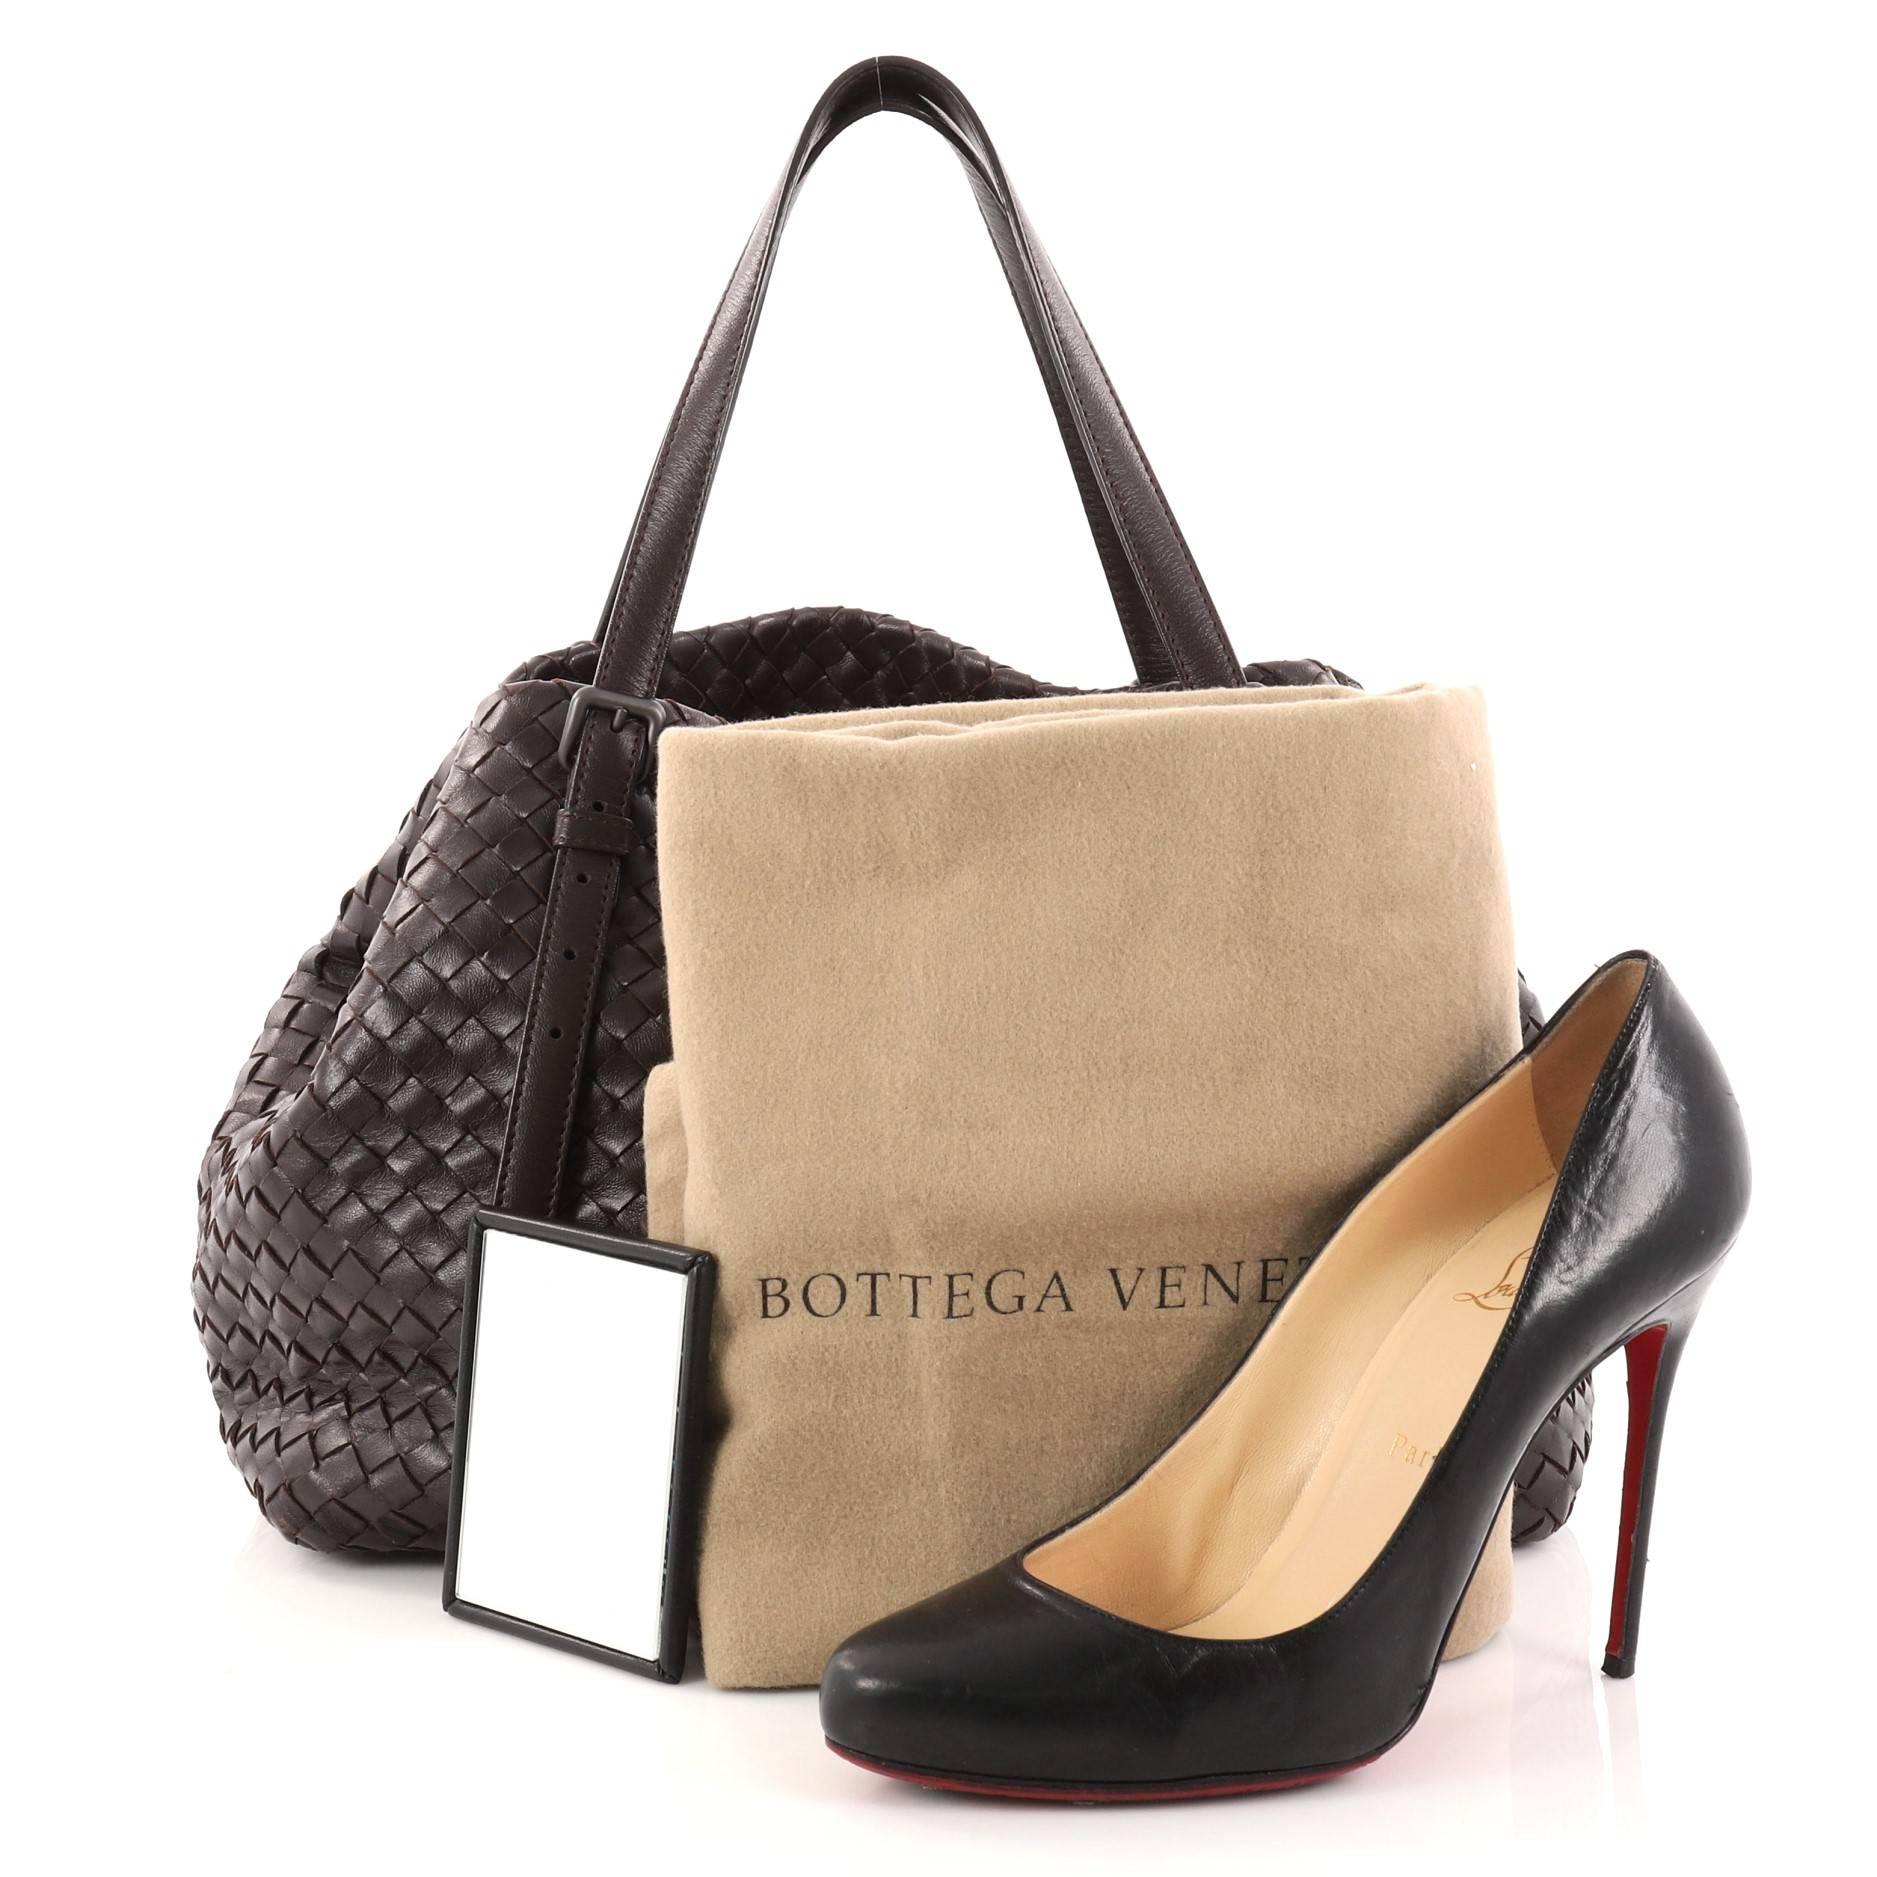 This authentic Bottega Veneta A-Shape Tote Intrecciato Nappa Medium is a statement piece you can surely take from day to night. Crafted in brown nappa leather woven in Bottega Veneta's signature intrecciato method, this stylish tote features